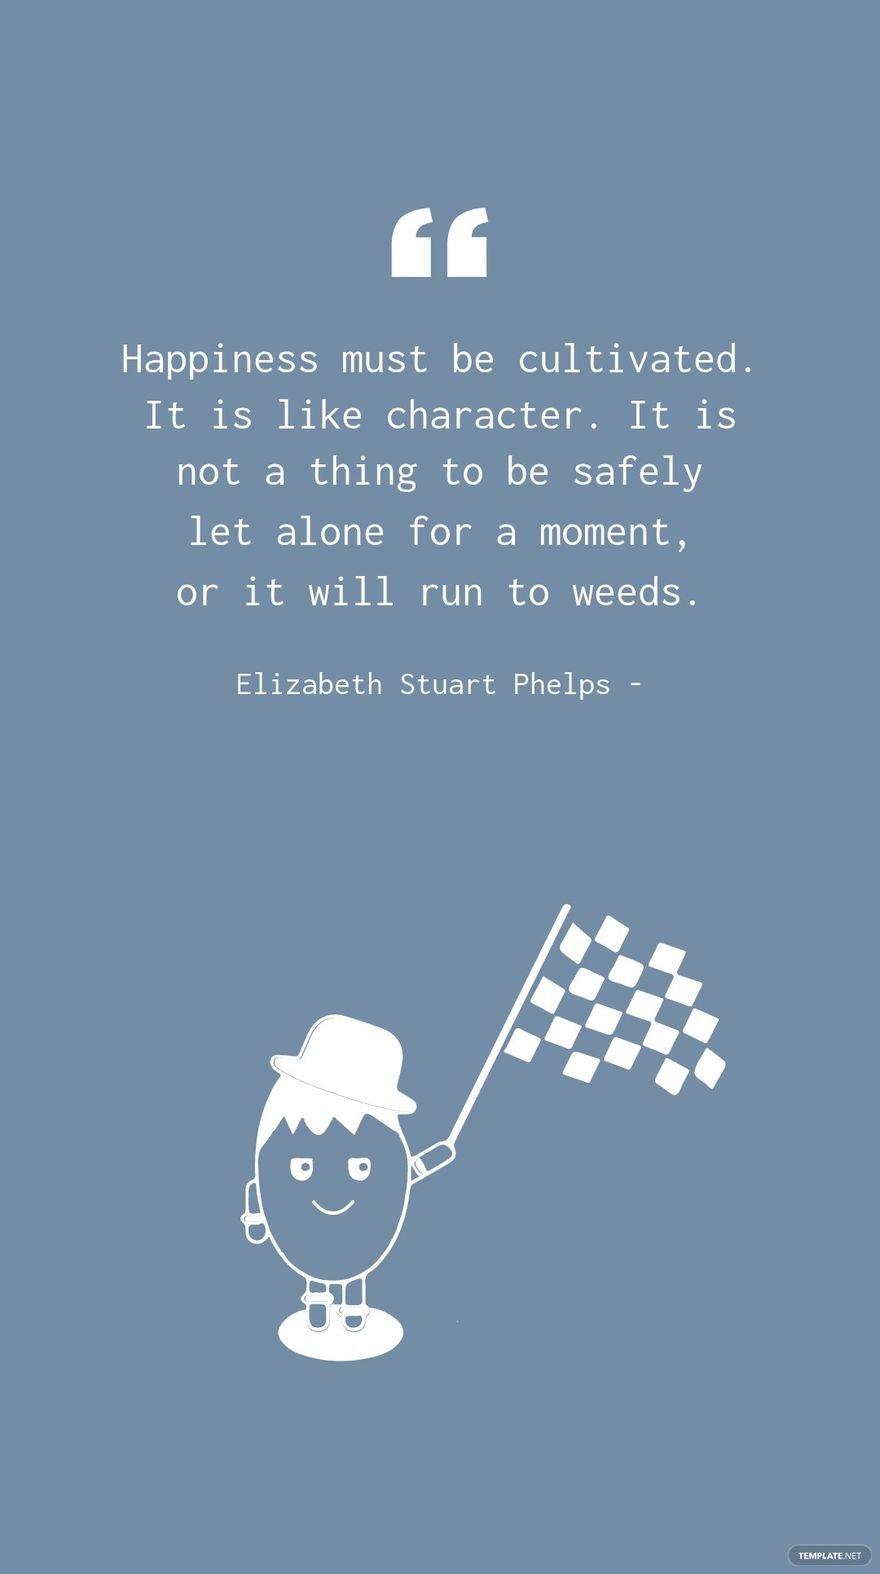 Free Elizabeth Stuart Phelps - Happiness must be cultivated. It is like character. It is not a thing to be safely let alone for a moment, or it will run to weeds.